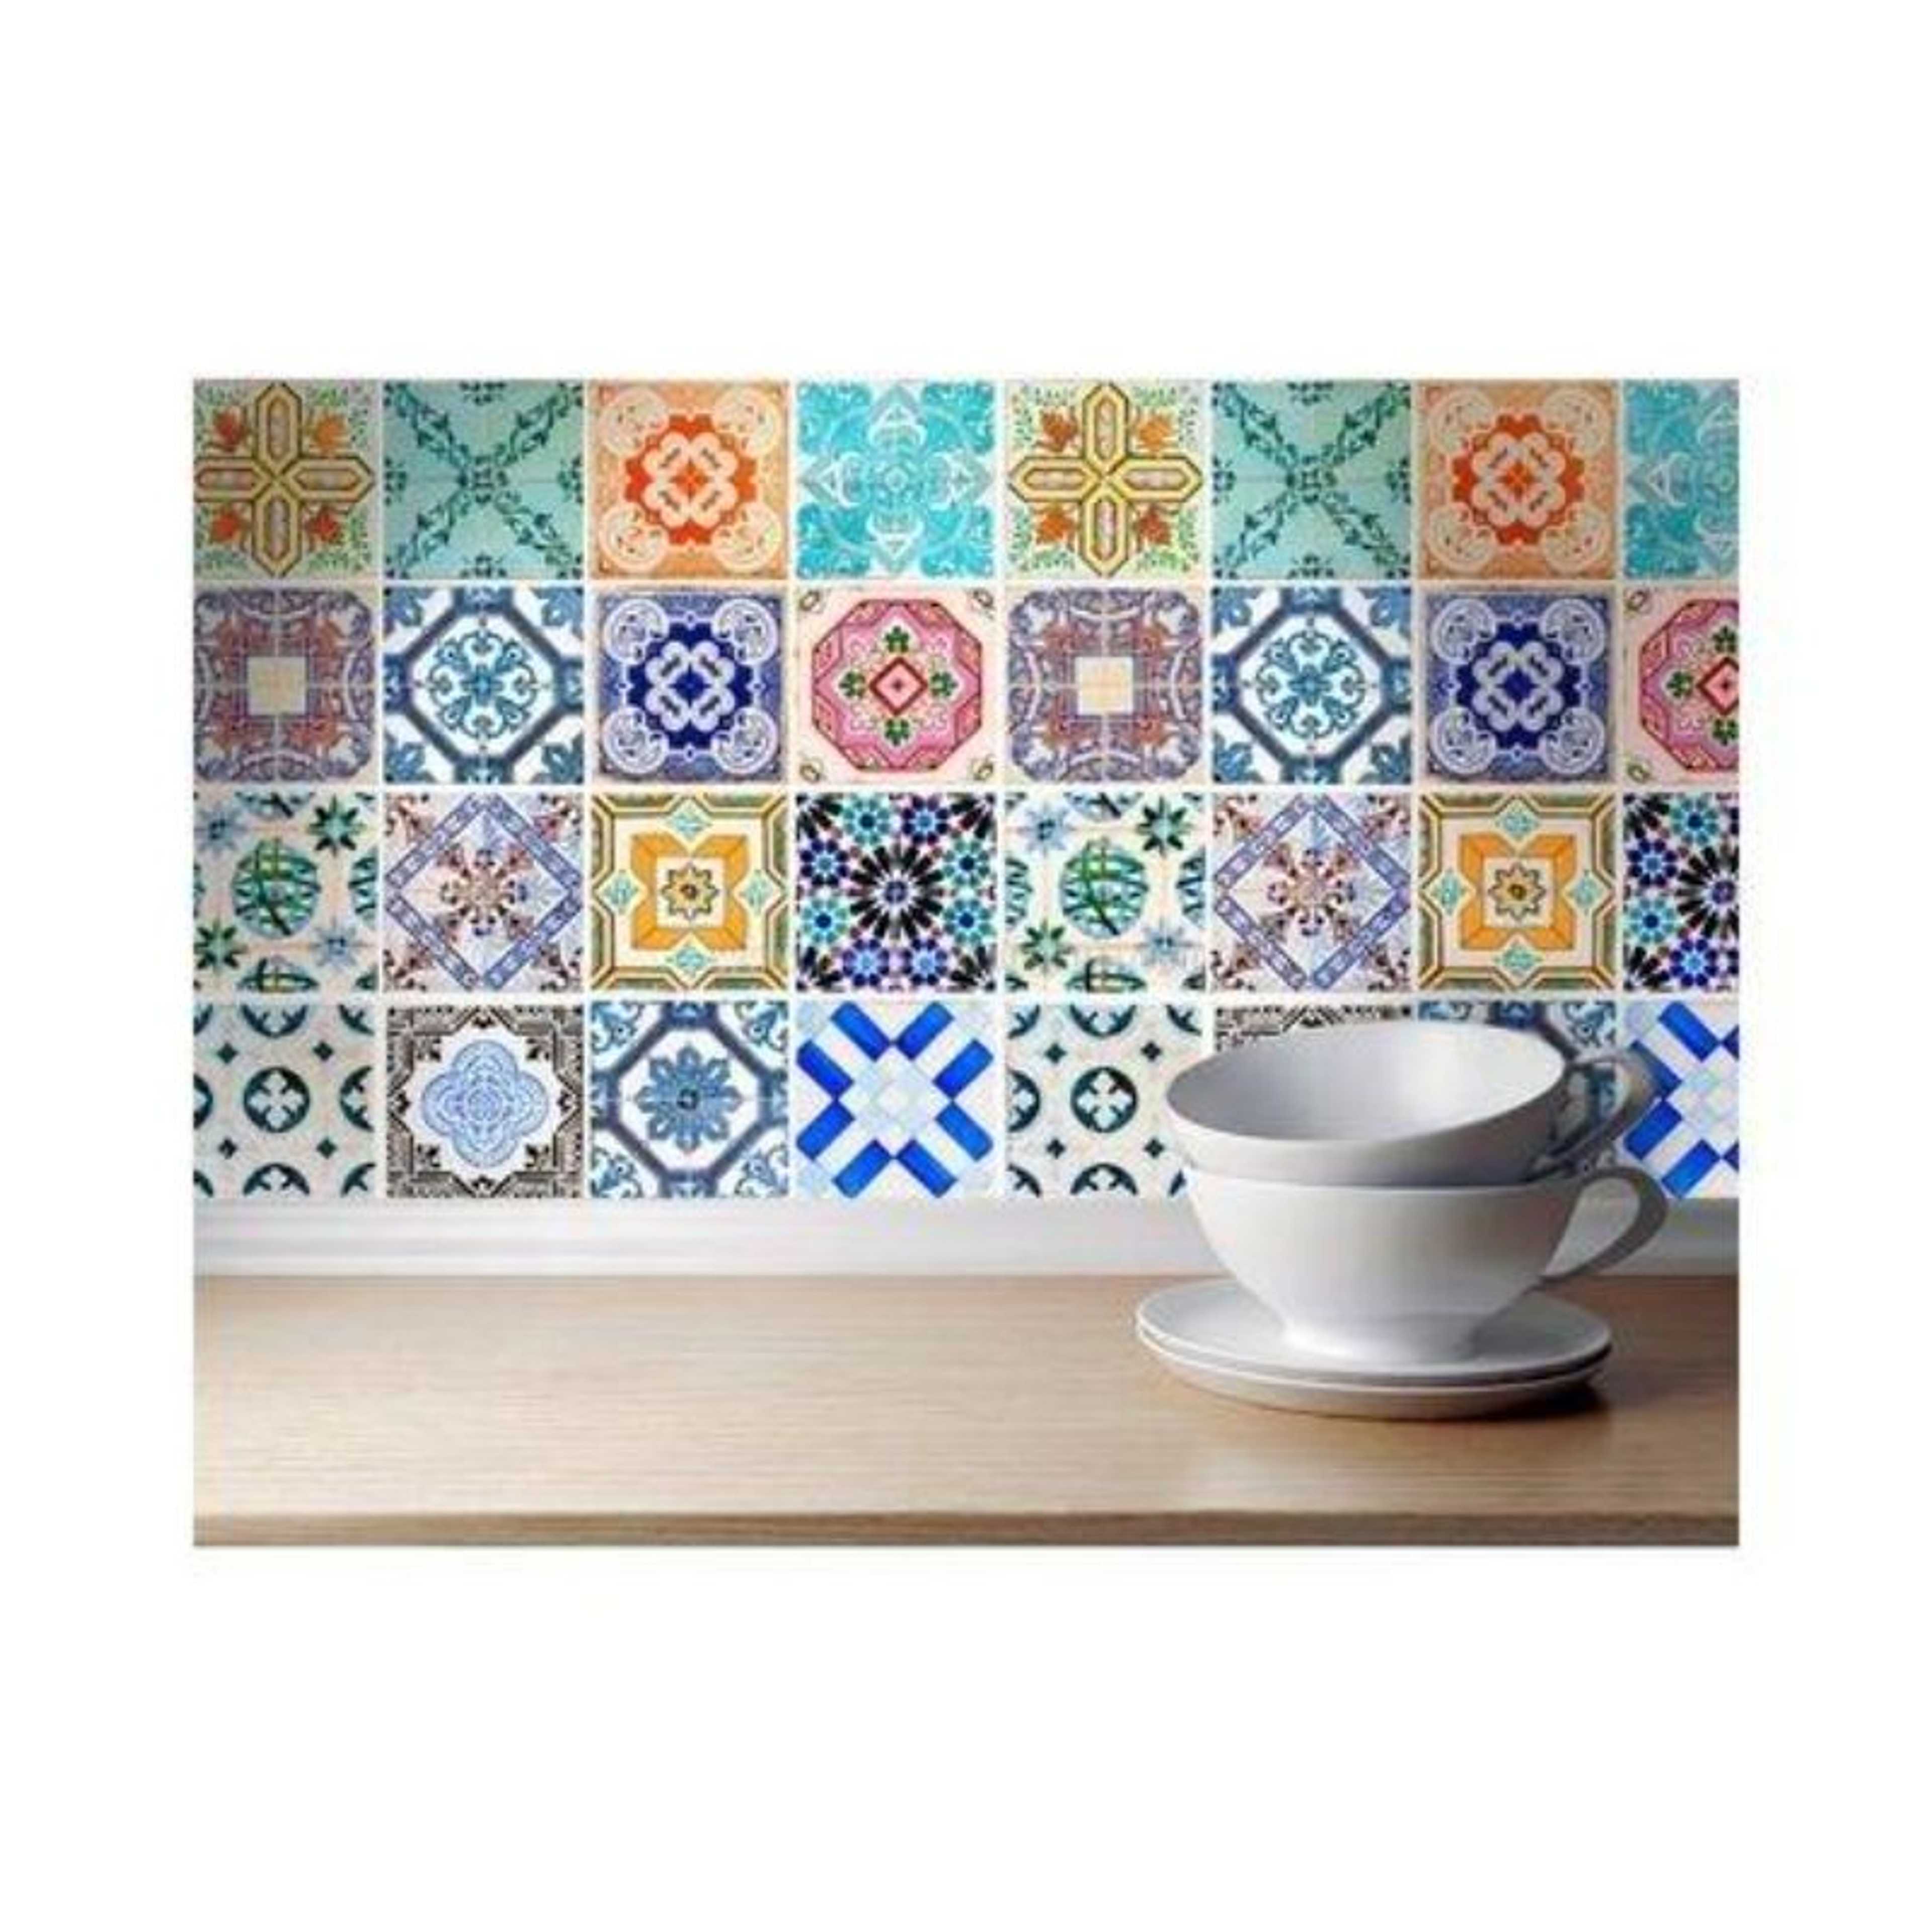 Pack Of 12 - Traditional Talavera Tiles Stickers For Bathroom & Kitchen - 6 X 6 Inches